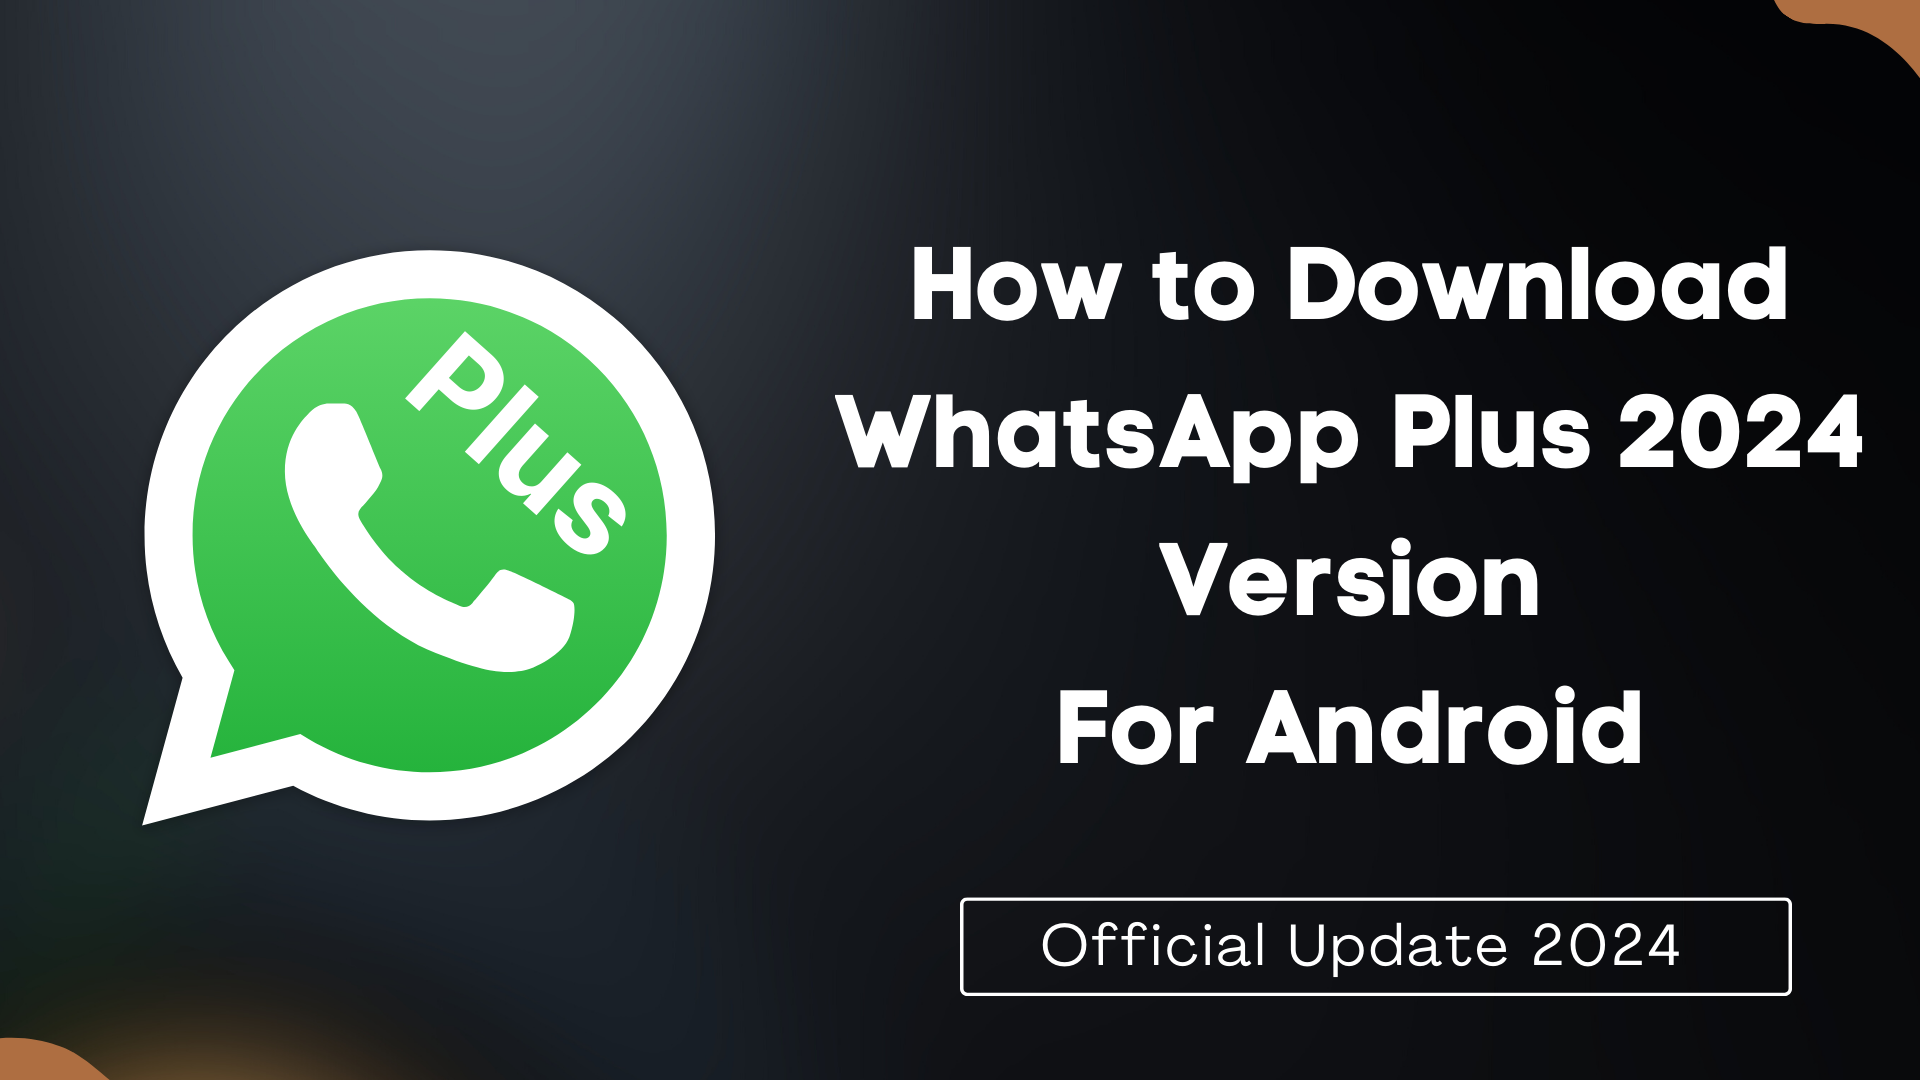 How to Download WhatsApp Plus 2024